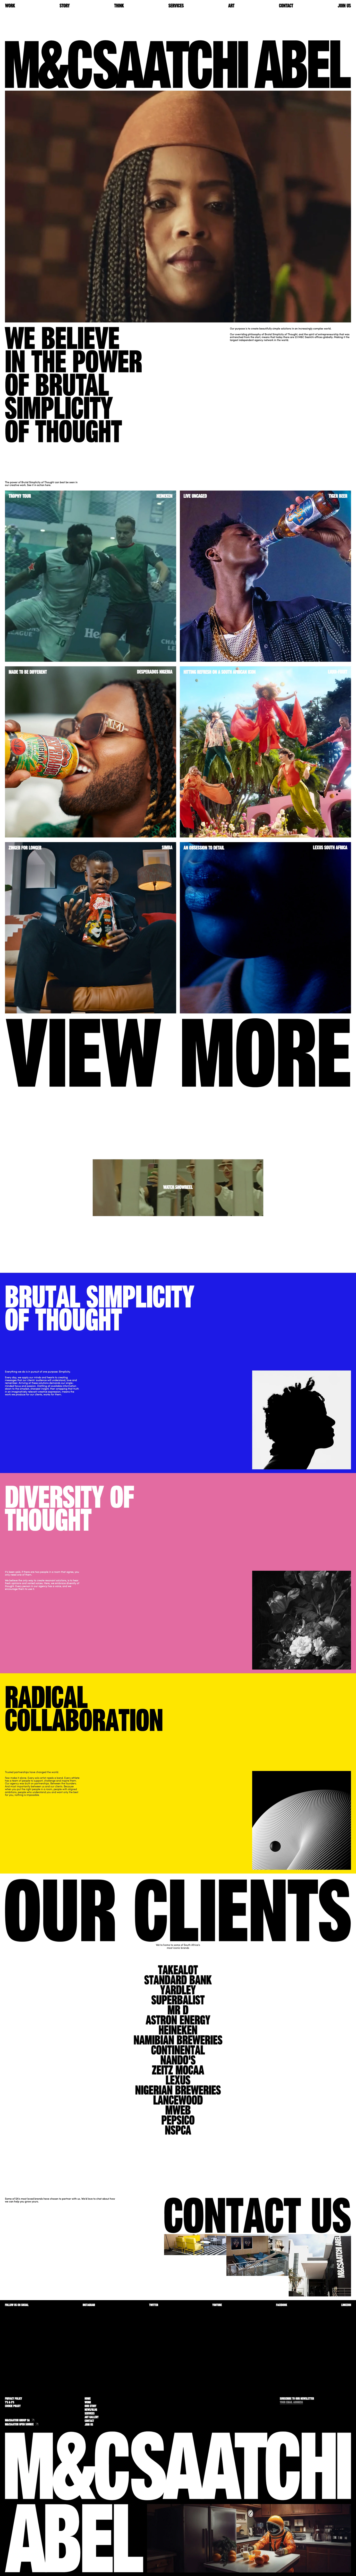 M&C Saatchi Abel Landing Page Example: M&C Saatchi Abel is an integrated, creative advertising agency founded on the principle of Brutal Simplicity of Thought.